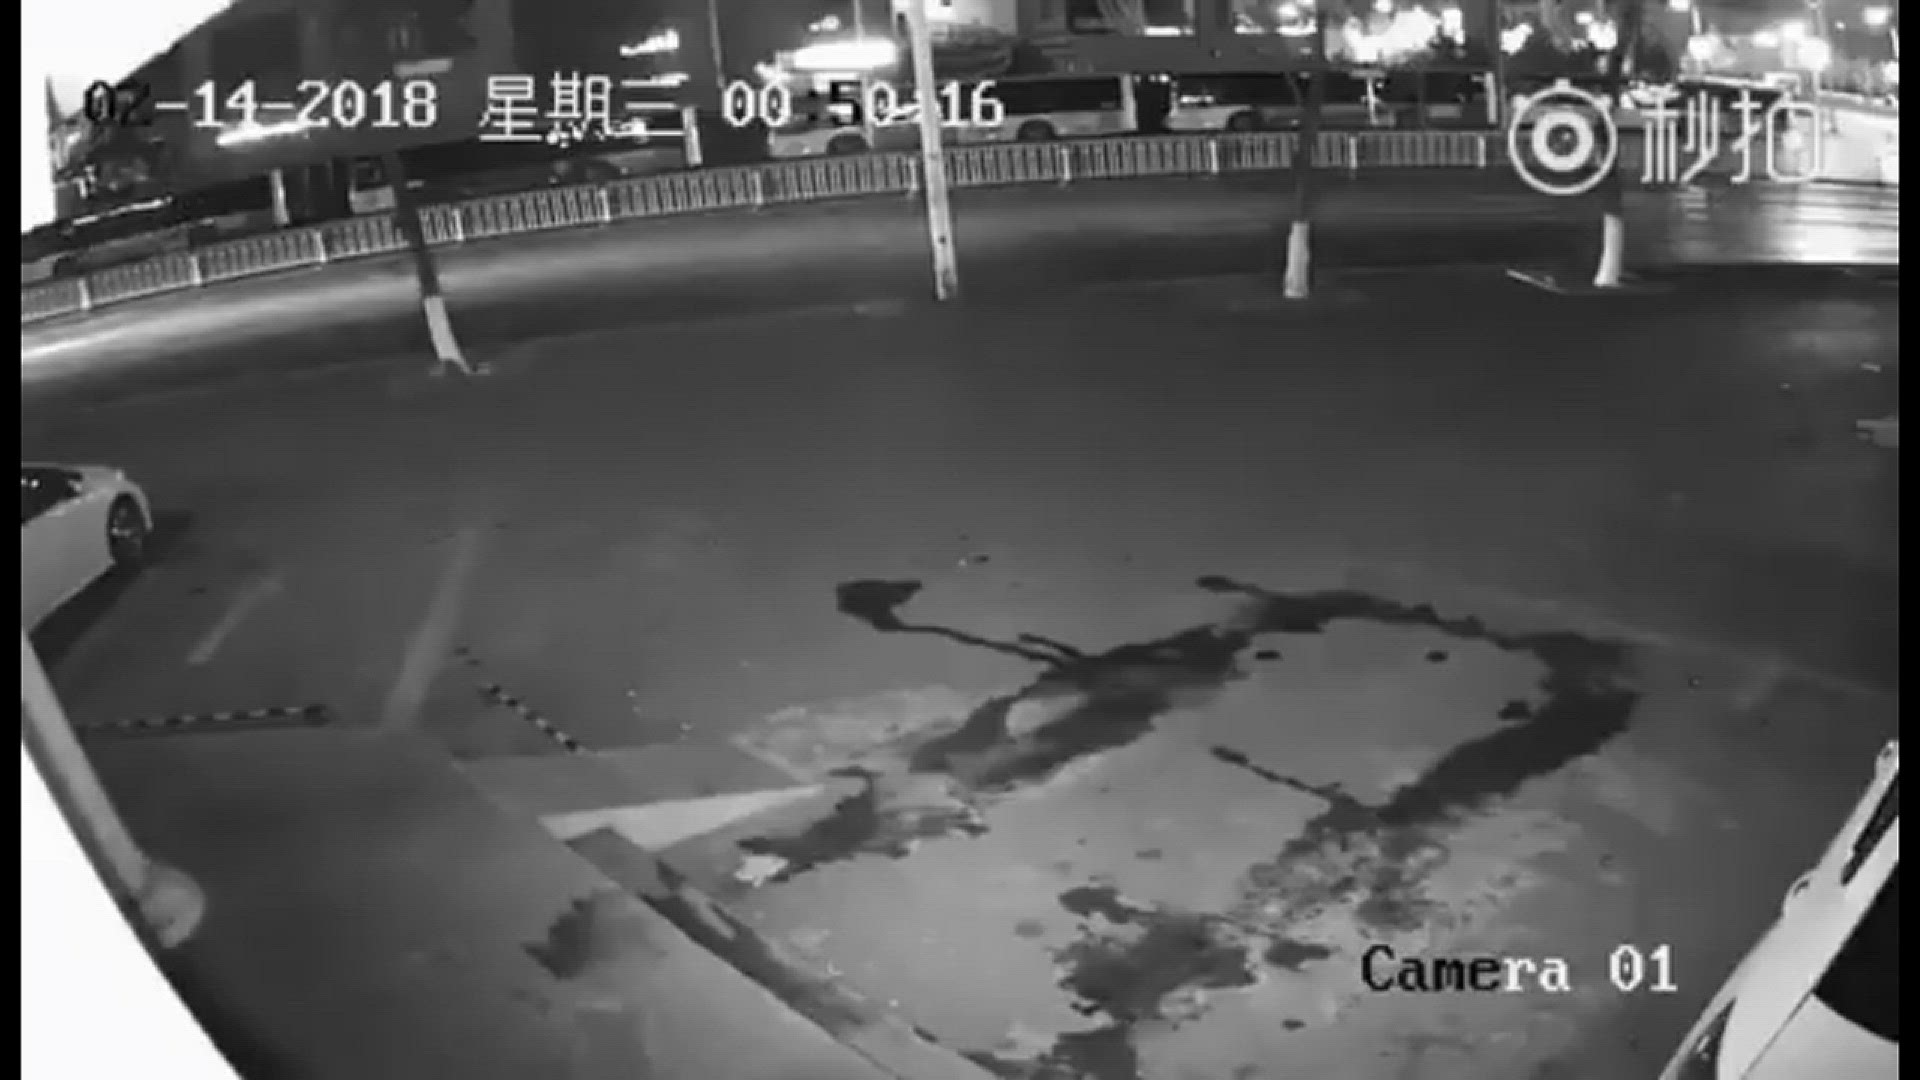 Video: Shanghai Jing'an Police ' Surveillance video shot in Shanghai captures an apparent break-in attempt gone very, very wrong.